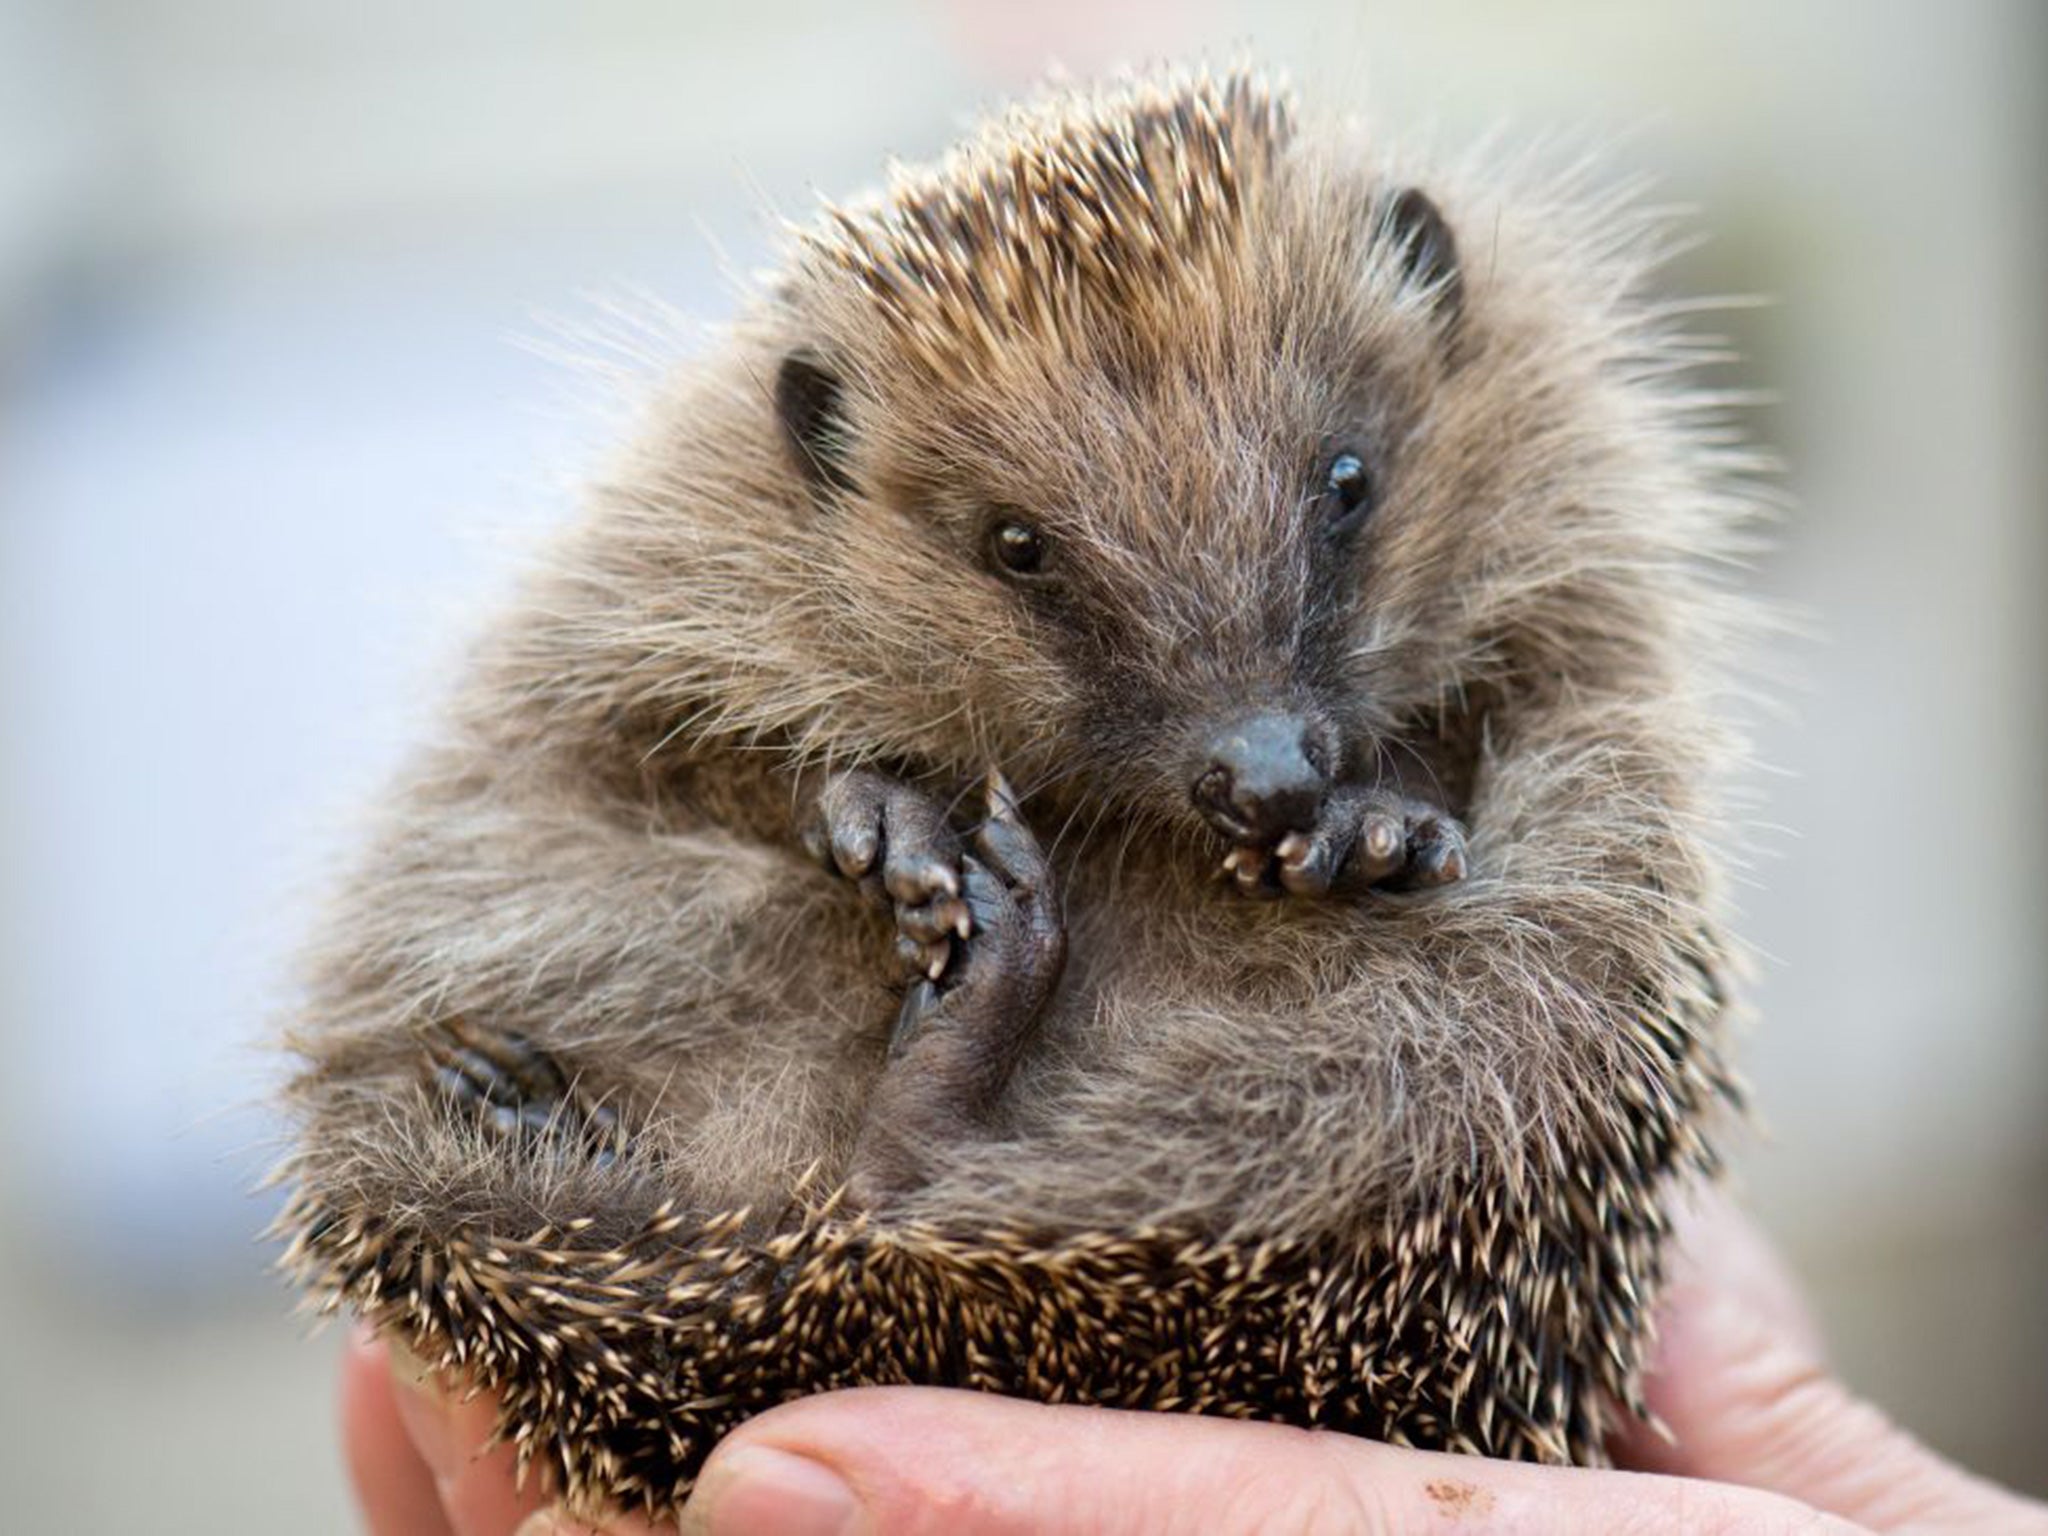 Hedgehogs are thought to have been declining for decade